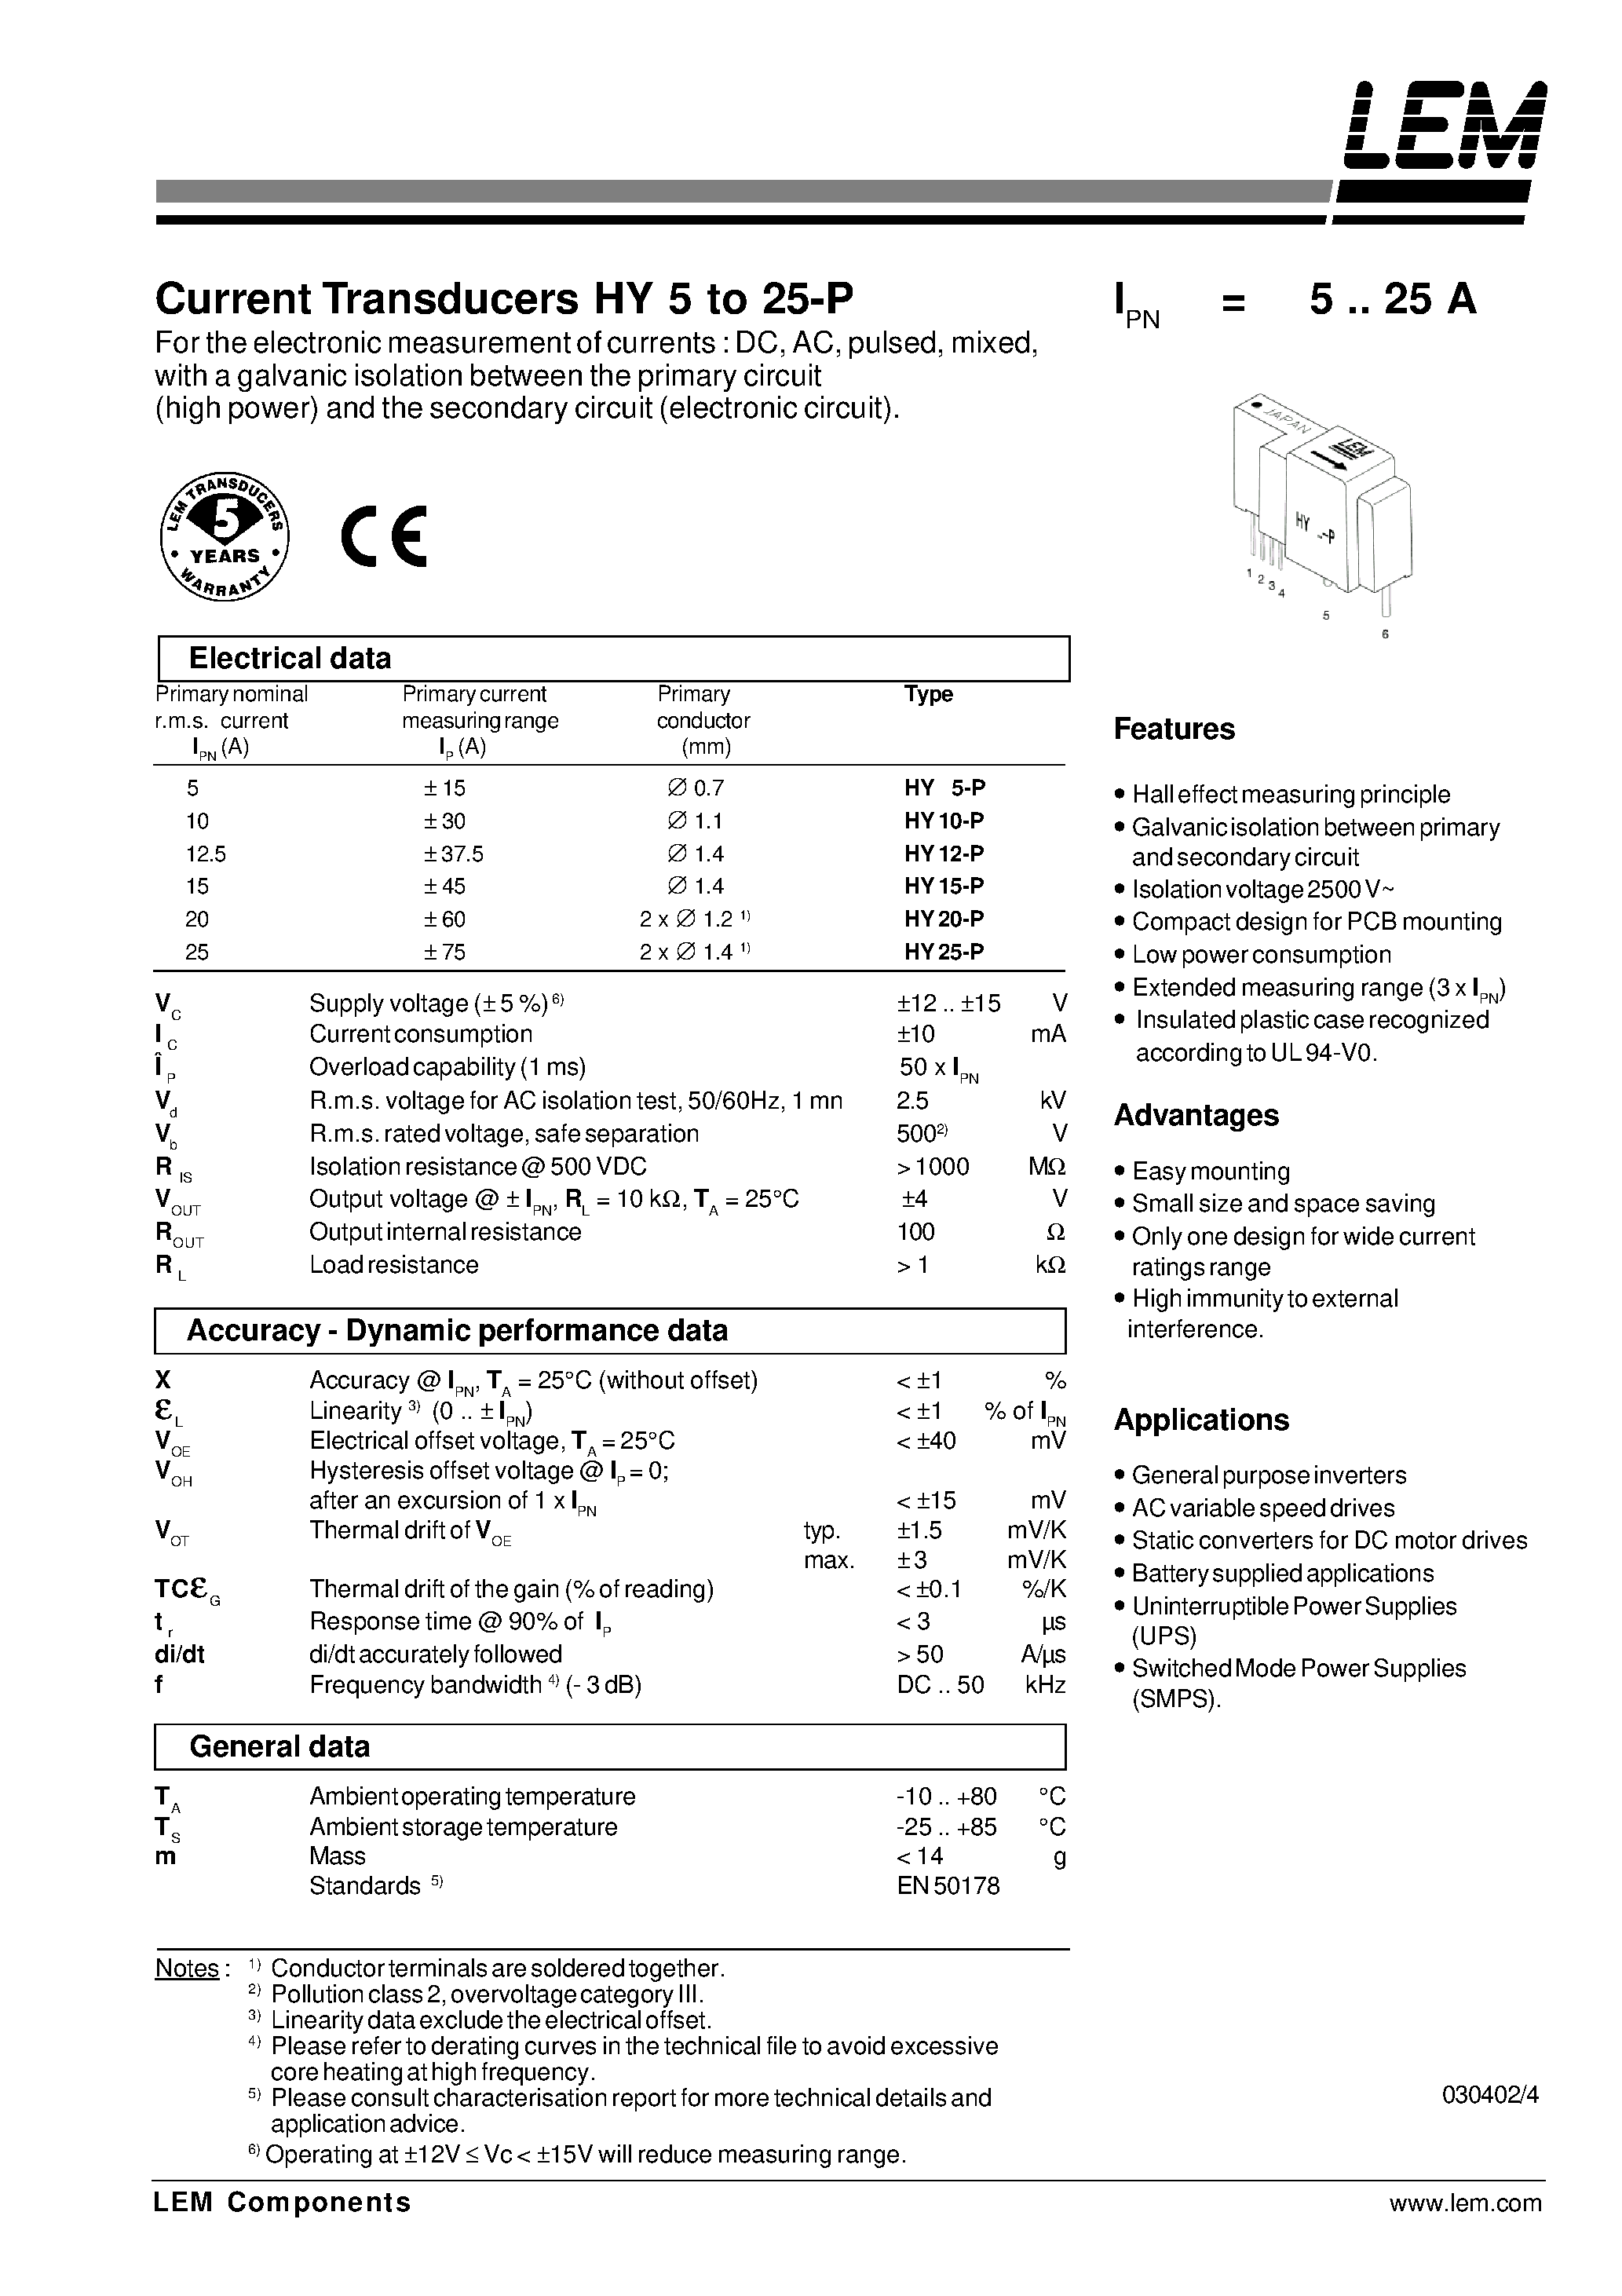 Datasheet HY25-P - Current Transducers HY 5 to 25-P page 1